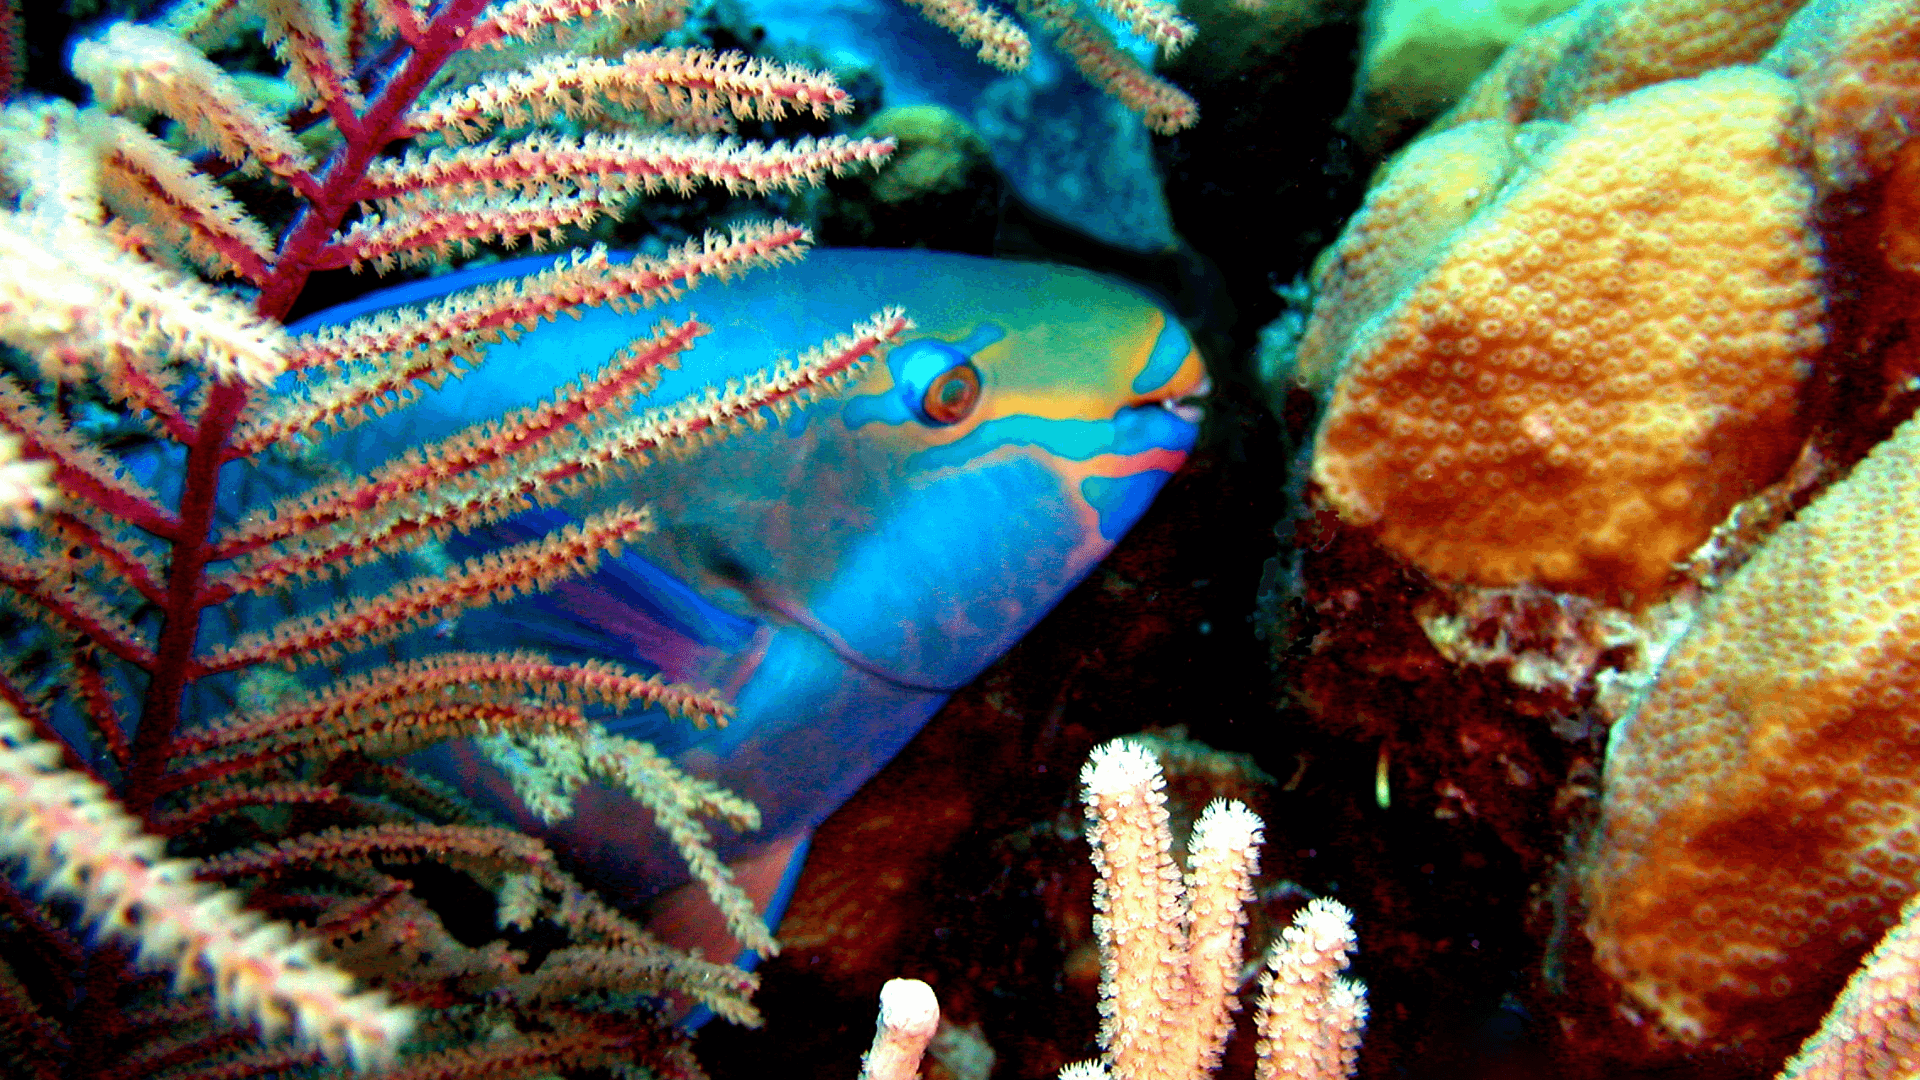 A photo of Parrotfish